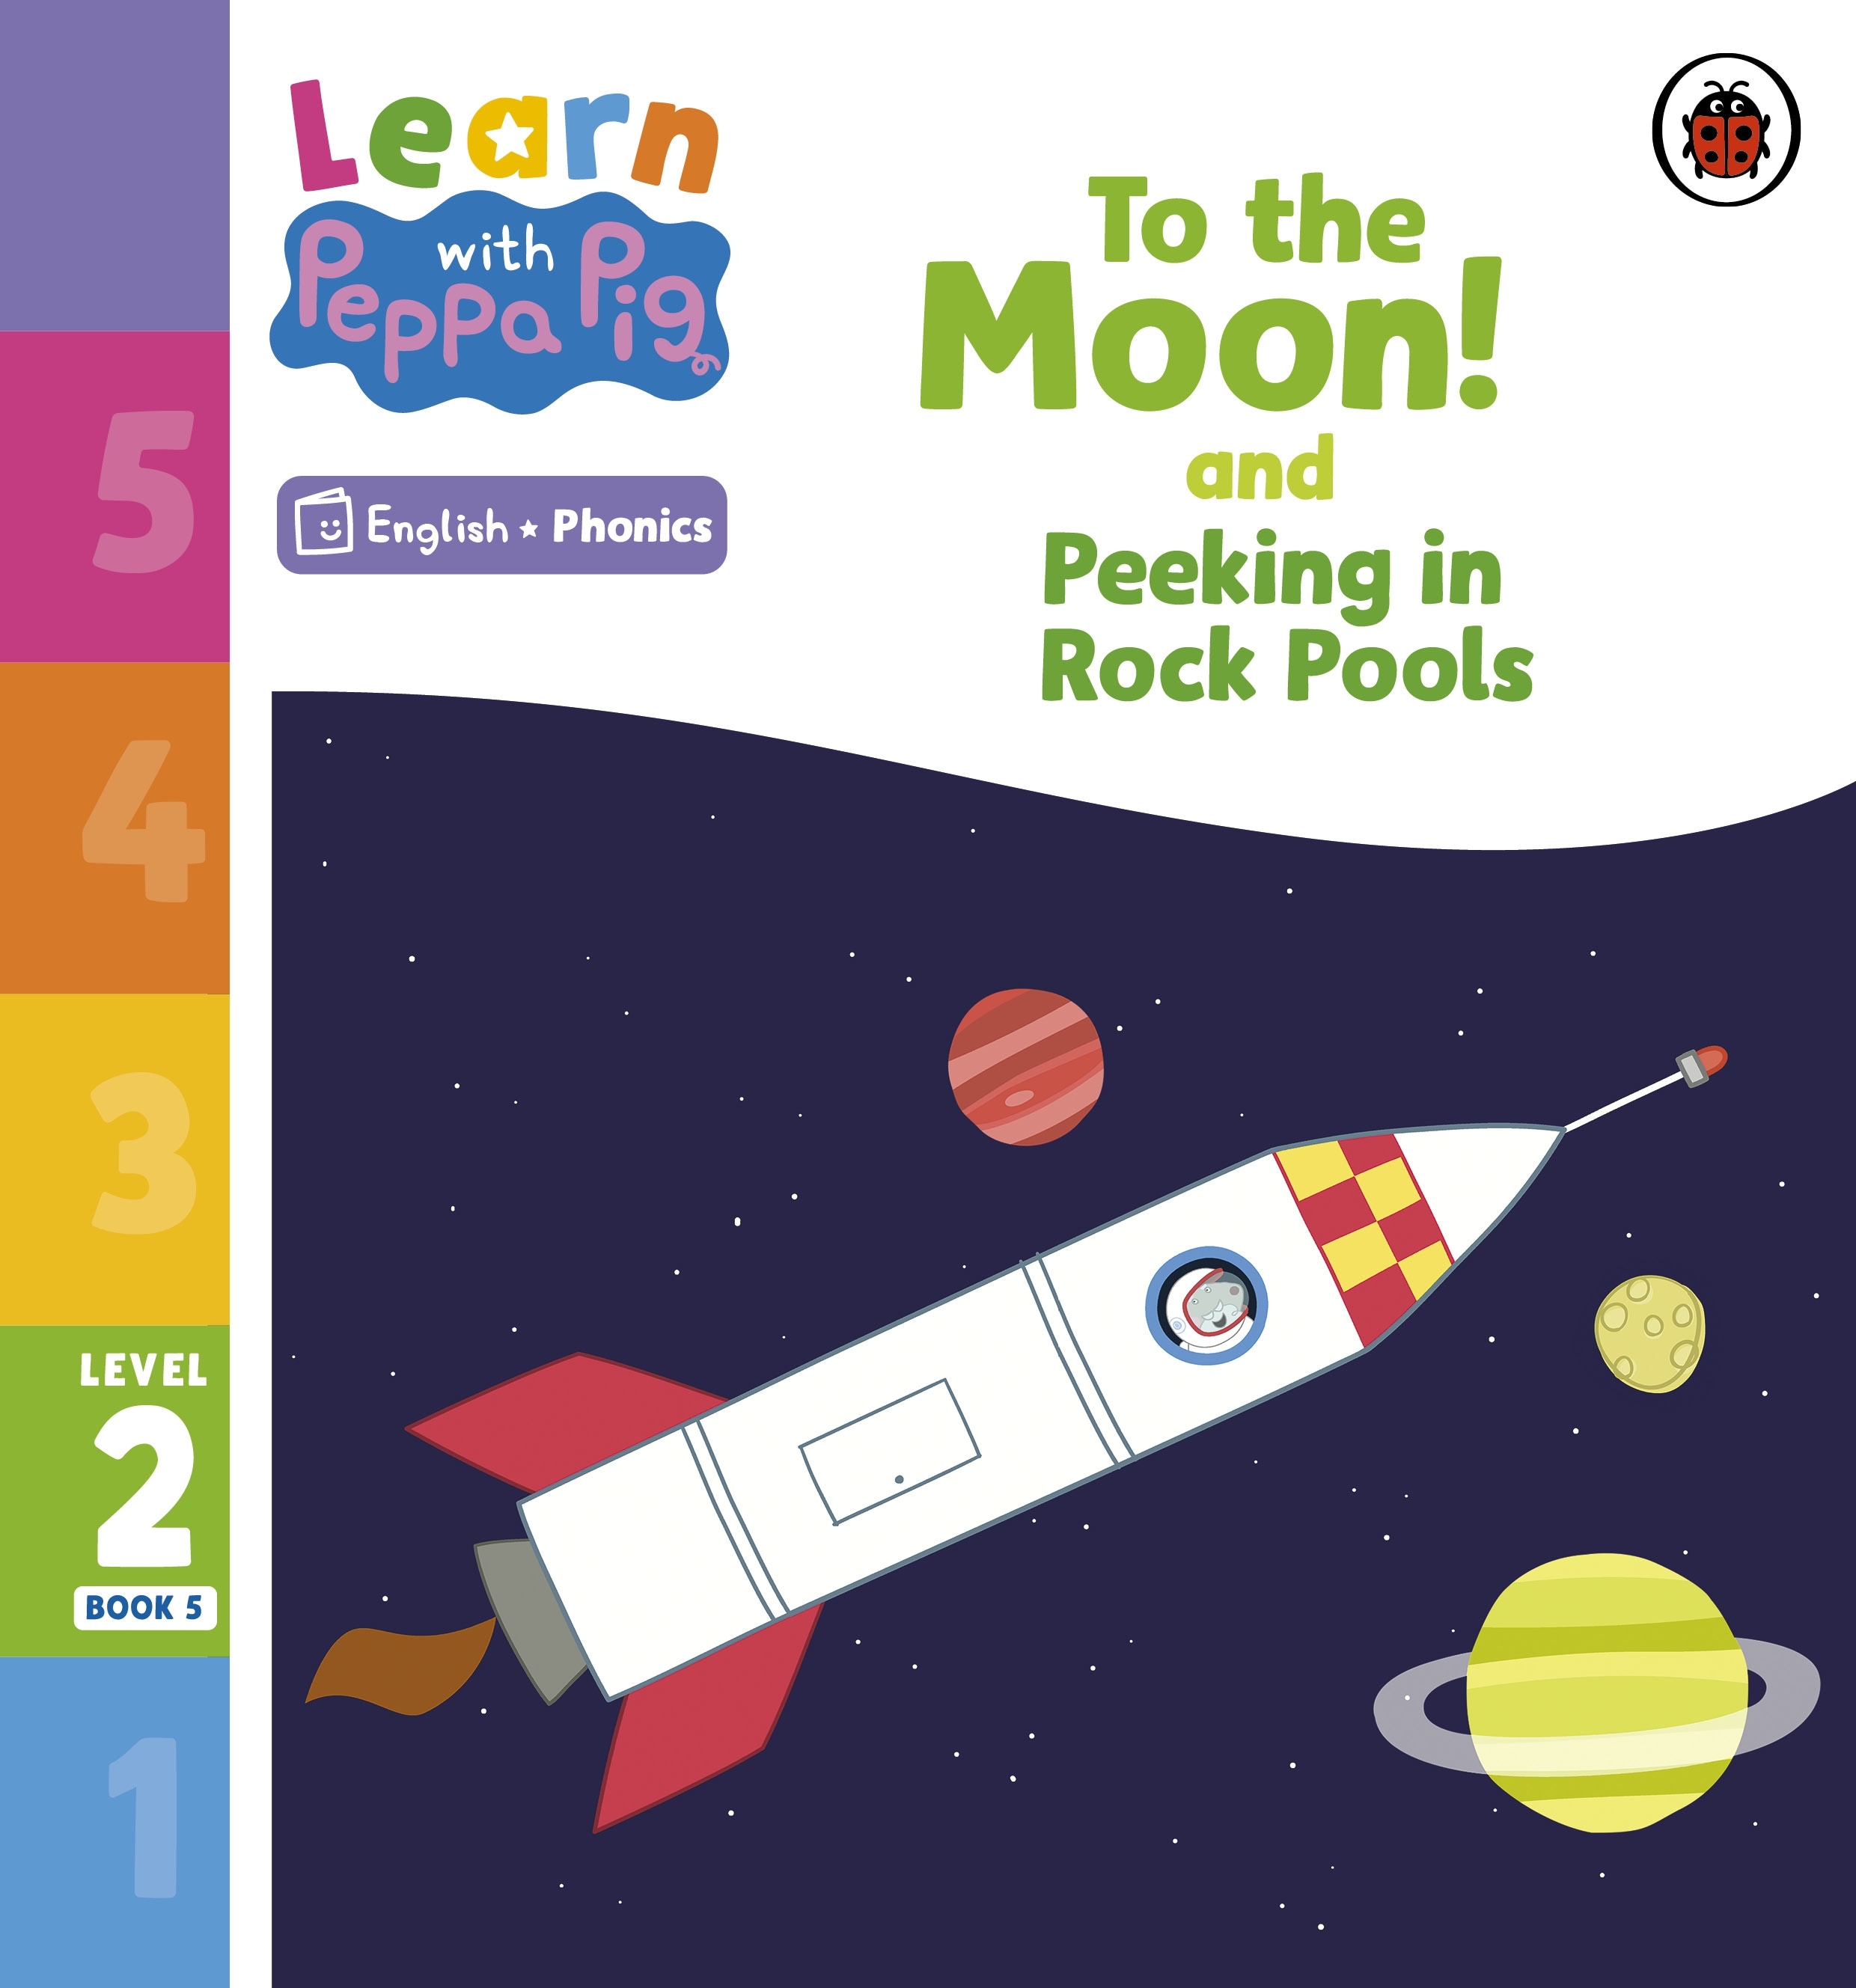 Book “Learn with Peppa Phonics Level 2 Book 5 — To the Moon! and Peeking in Rock Pools (Phonics Reader)” by Peppa Pig — January 5, 2023